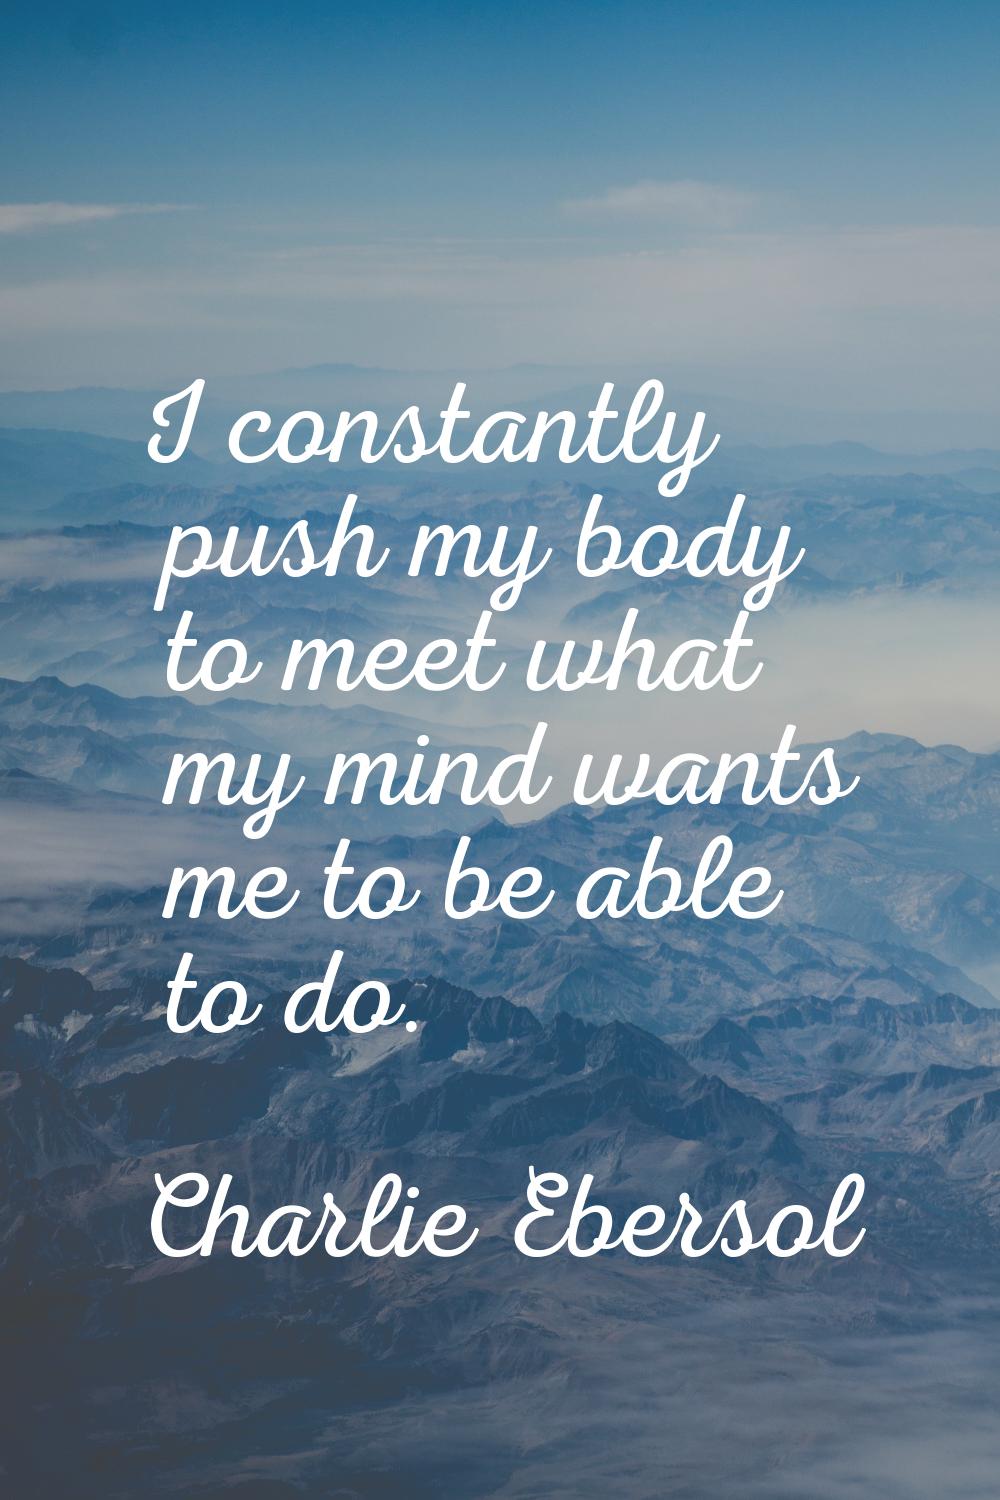 I constantly push my body to meet what my mind wants me to be able to do.